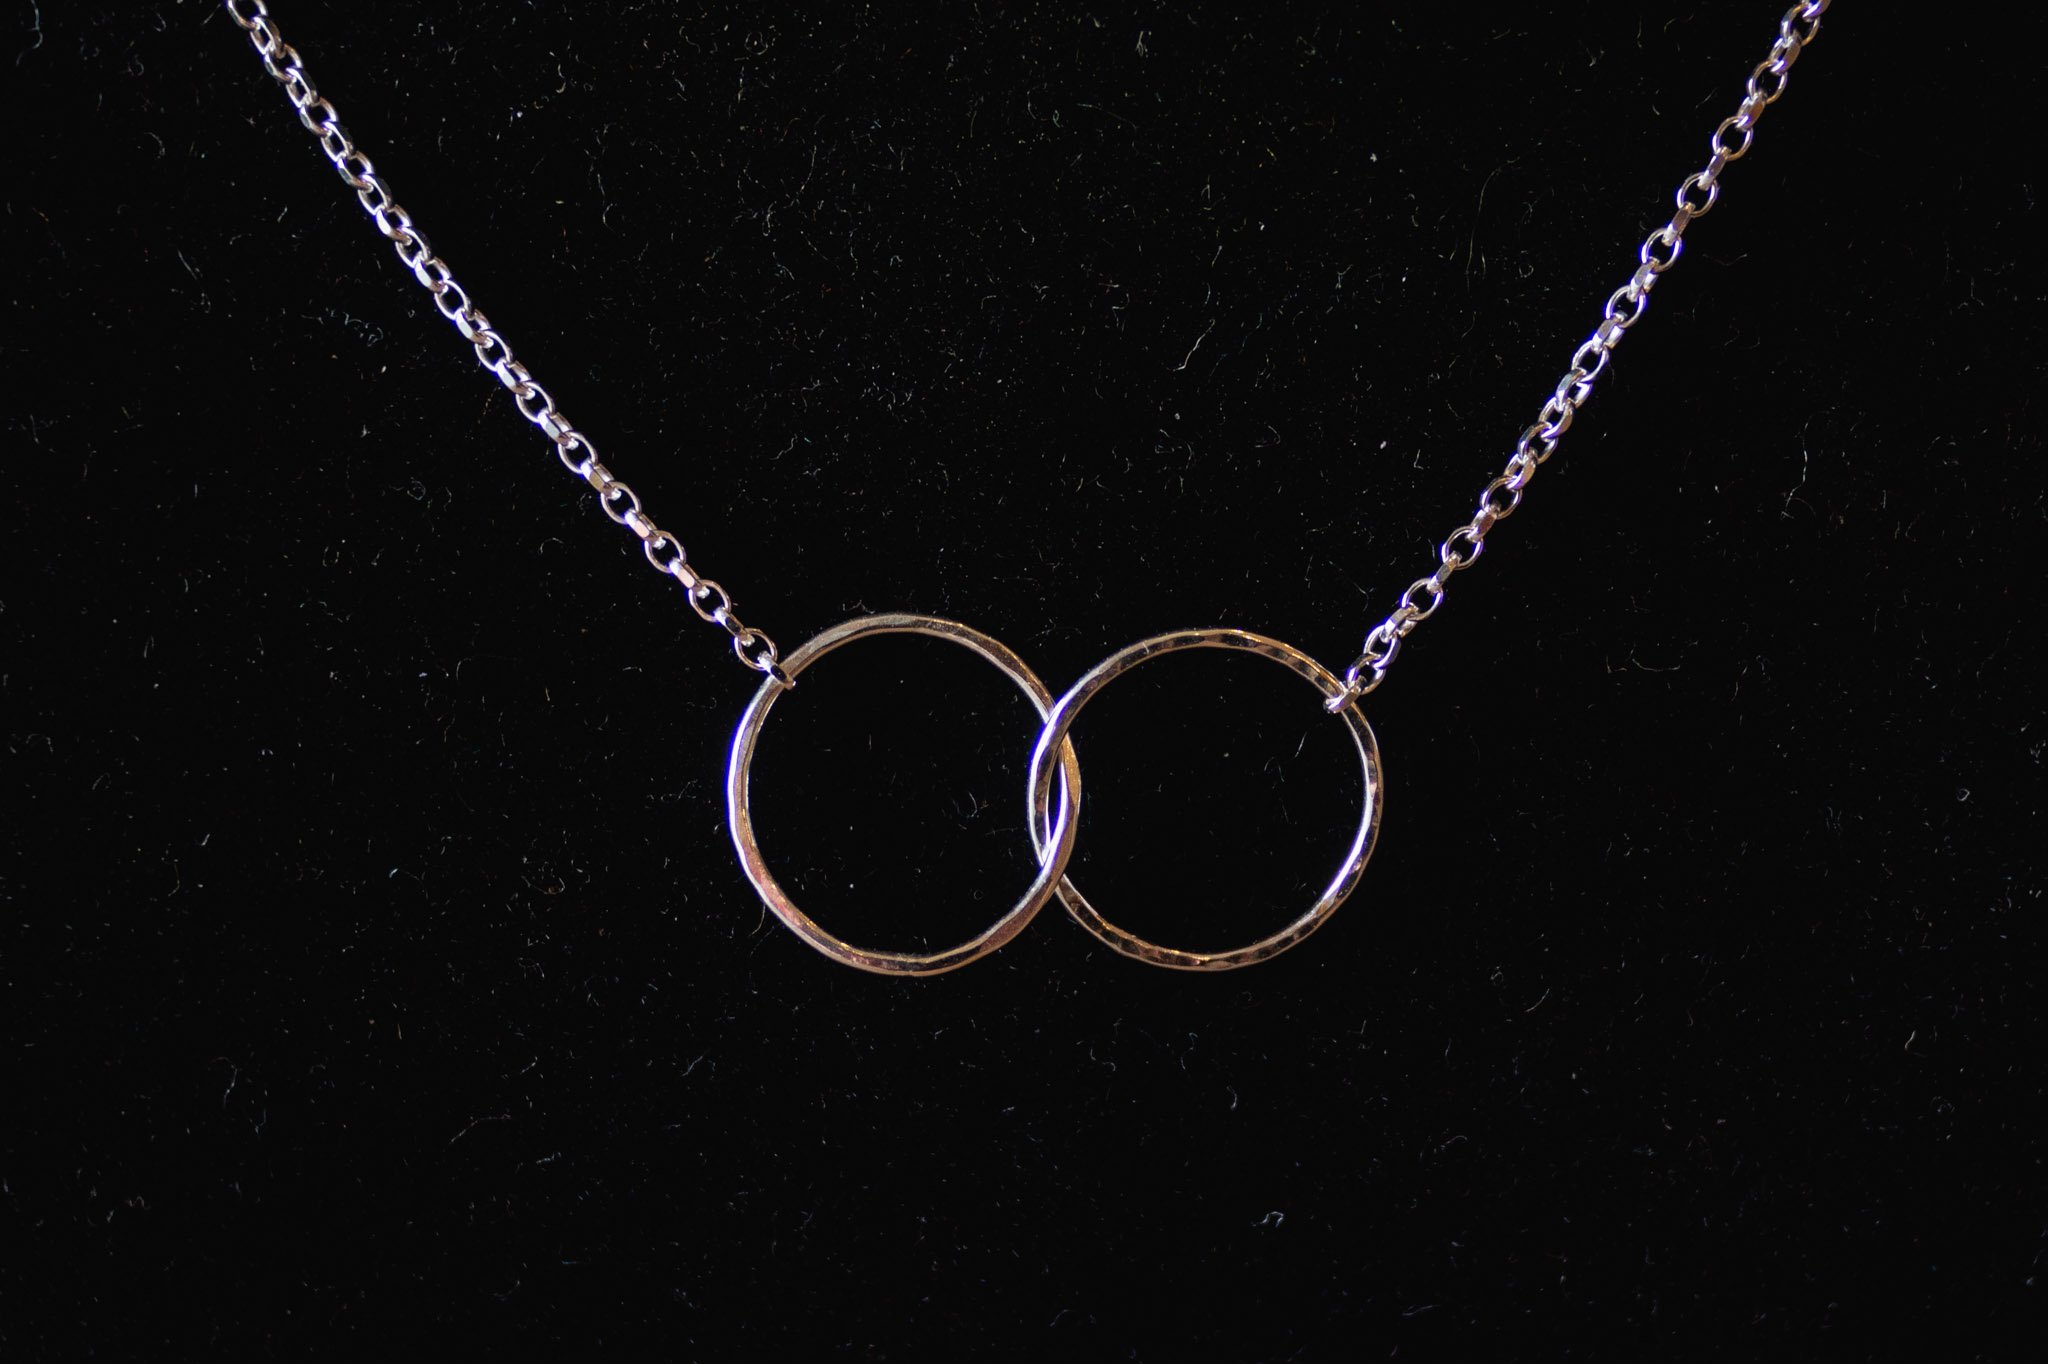 Silver Interlocking Circles Necklace by Elements Gallery